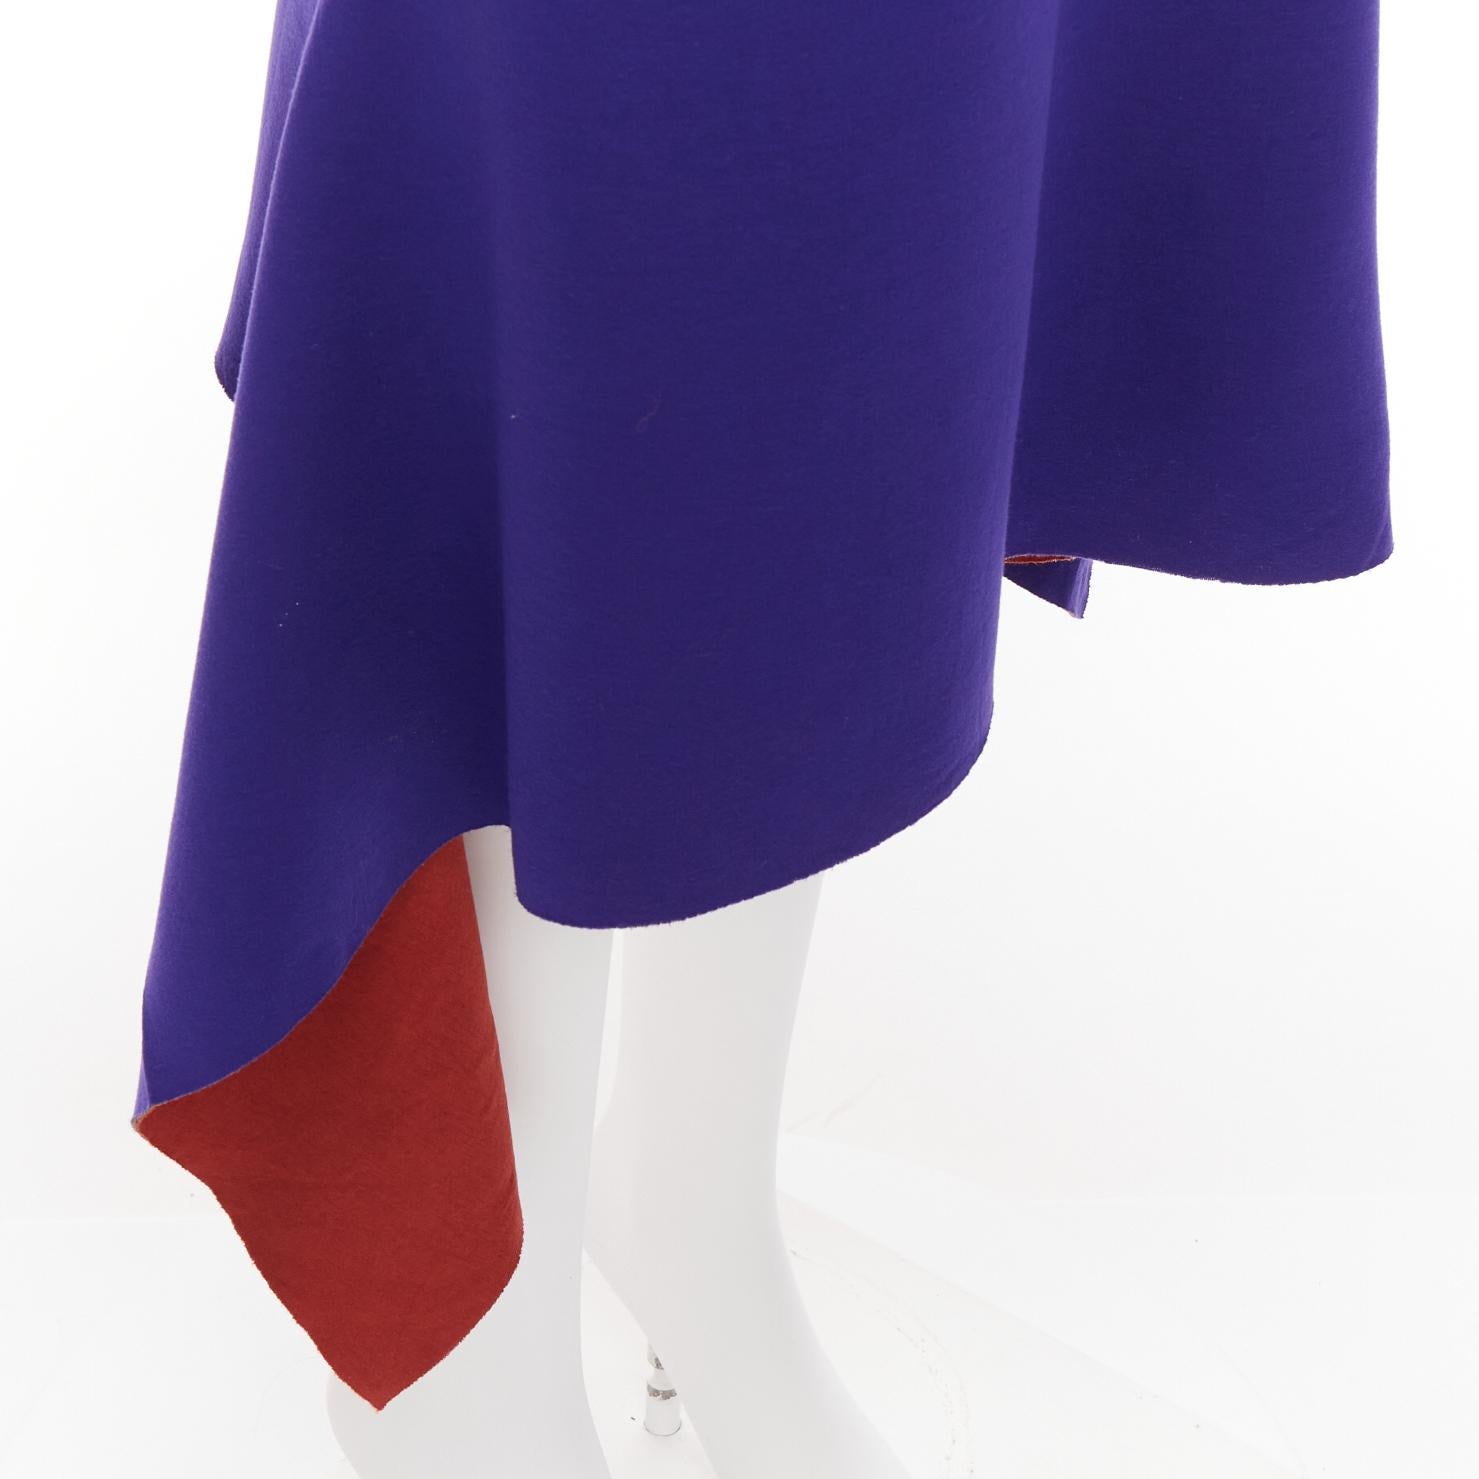 MARNI purple burgundy asymmetric hi low hem low waist knee skirt IT40 S
Reference: CELG/A00430
Brand: Marni
Material: Viscose
Color: Purple, Burgundy
Pattern: Solid
Closure: Zip
Lining: Burgundy Viscose
Made in: Italy

CONDITION:
Condition: